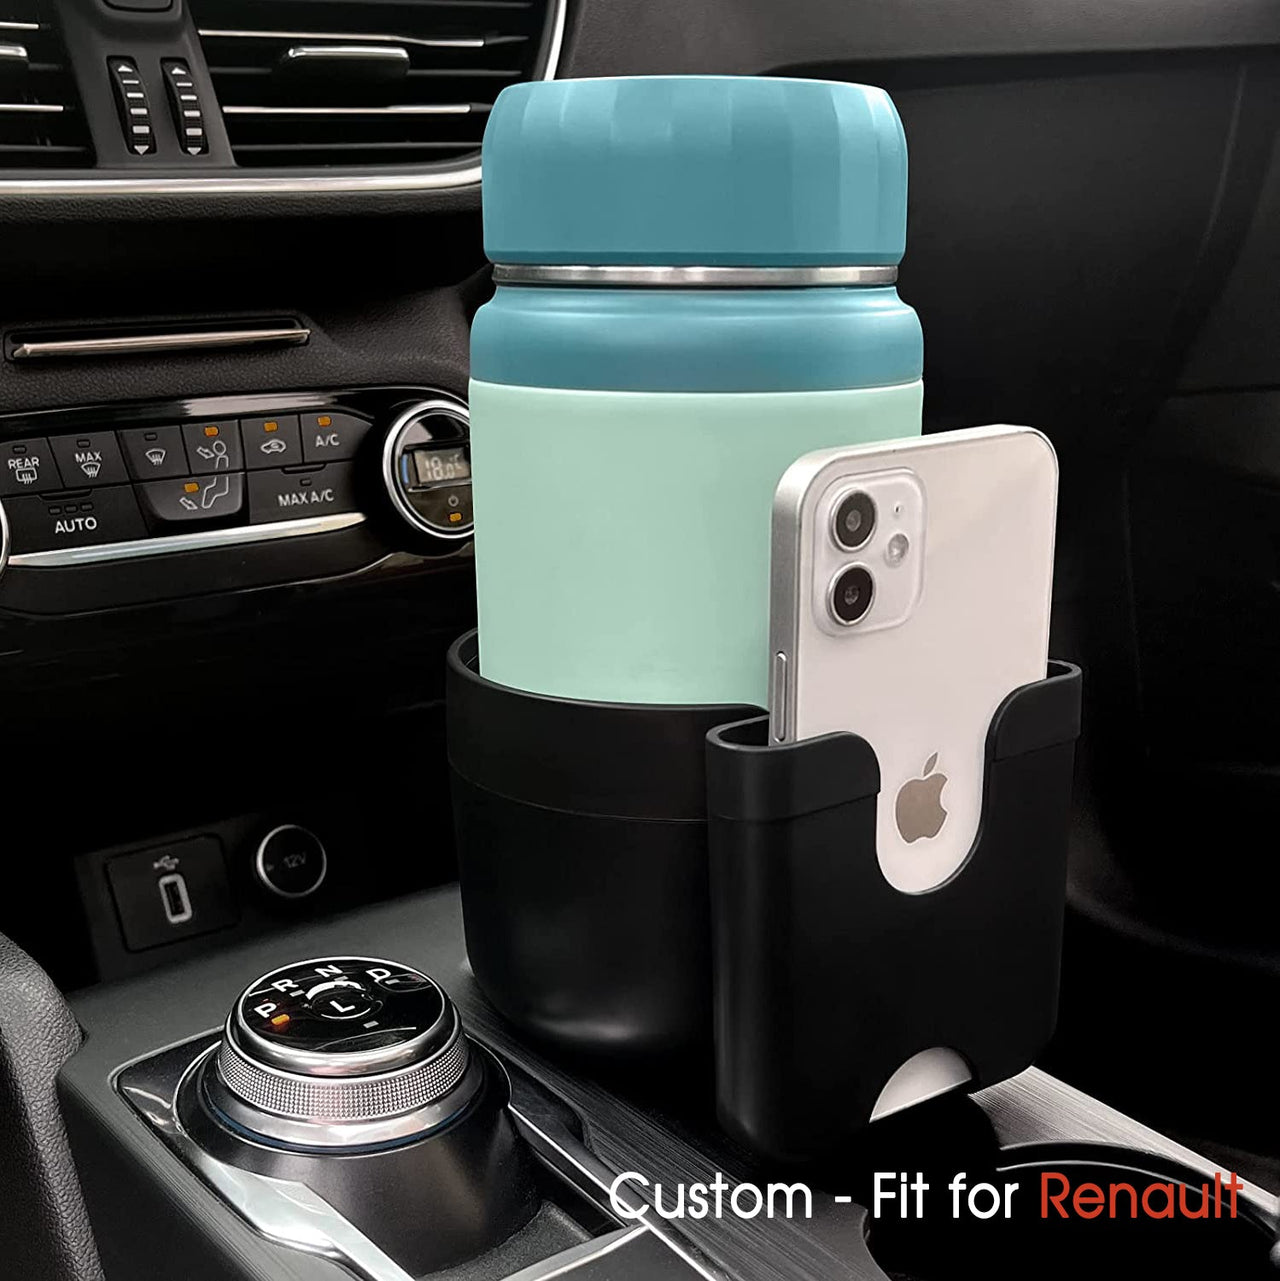 Car Cup Holder 2-in-1, Custom-Fit For Car, Car Cup Holder Expander Adapter with Adjustable Base, Car Cup Holder Expander Organizer with Phone Holder WASA233